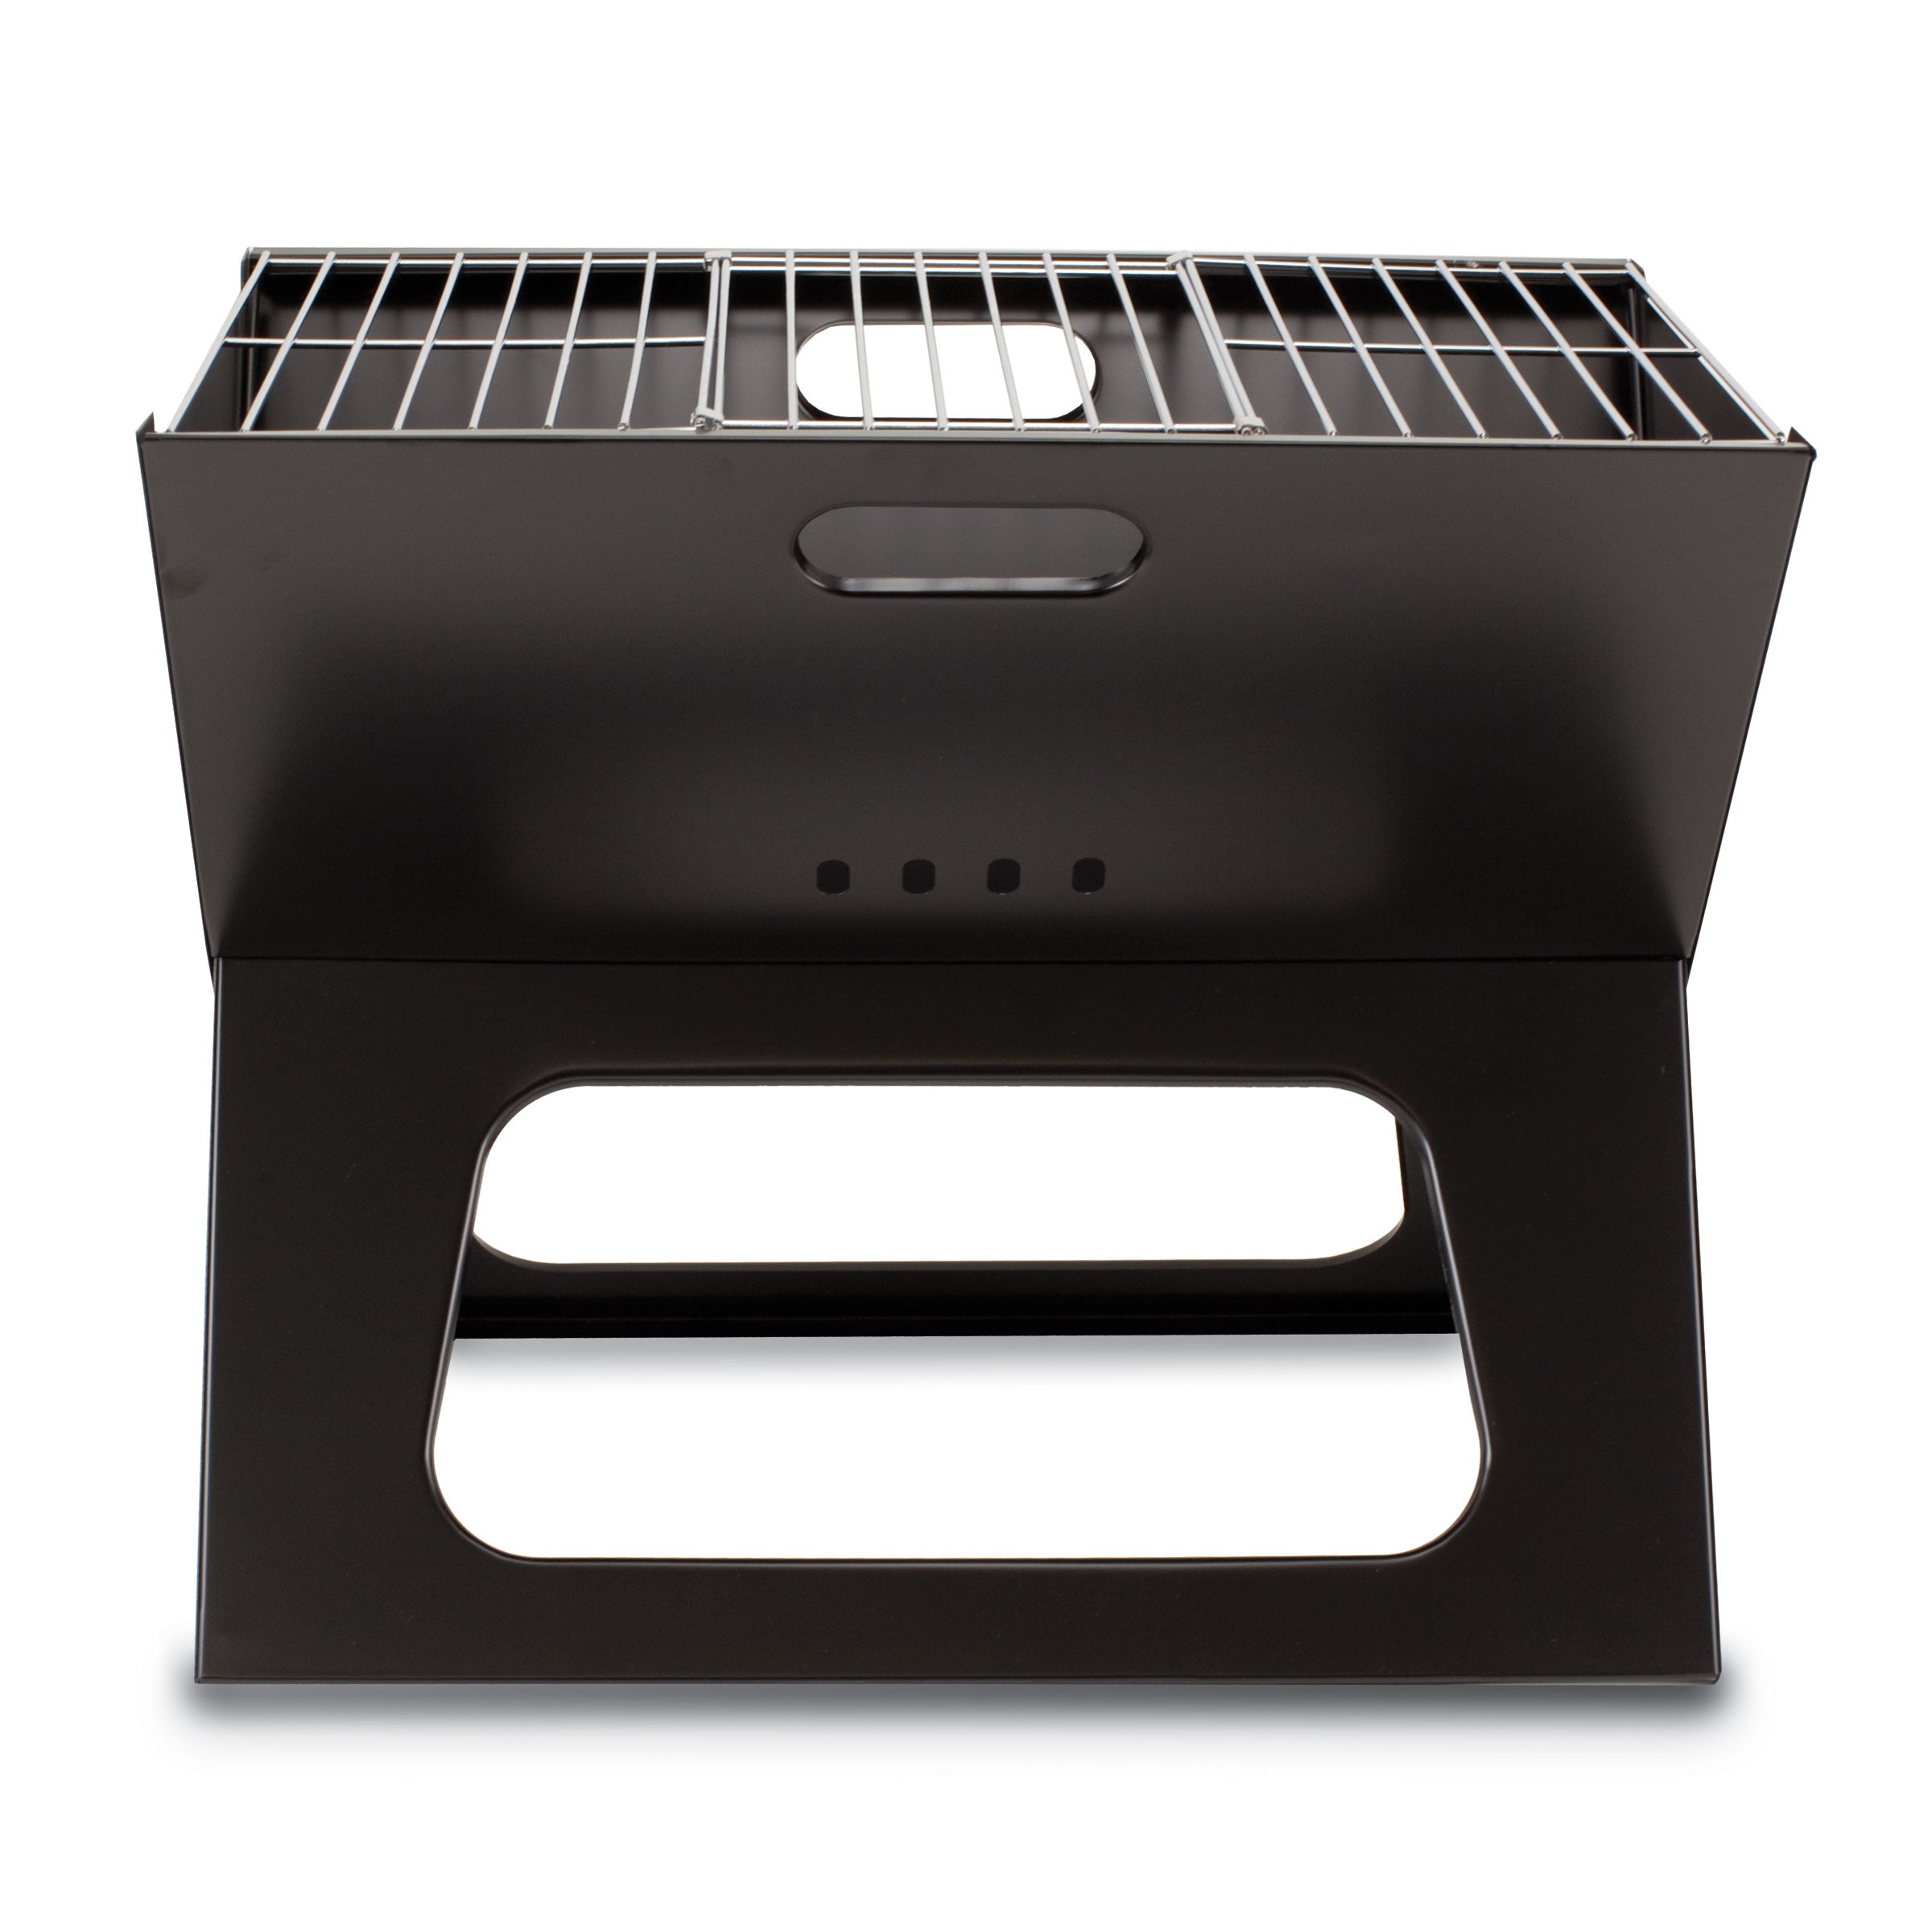 New York Mets - X-Grill Portable Charcoal BBQ Grill